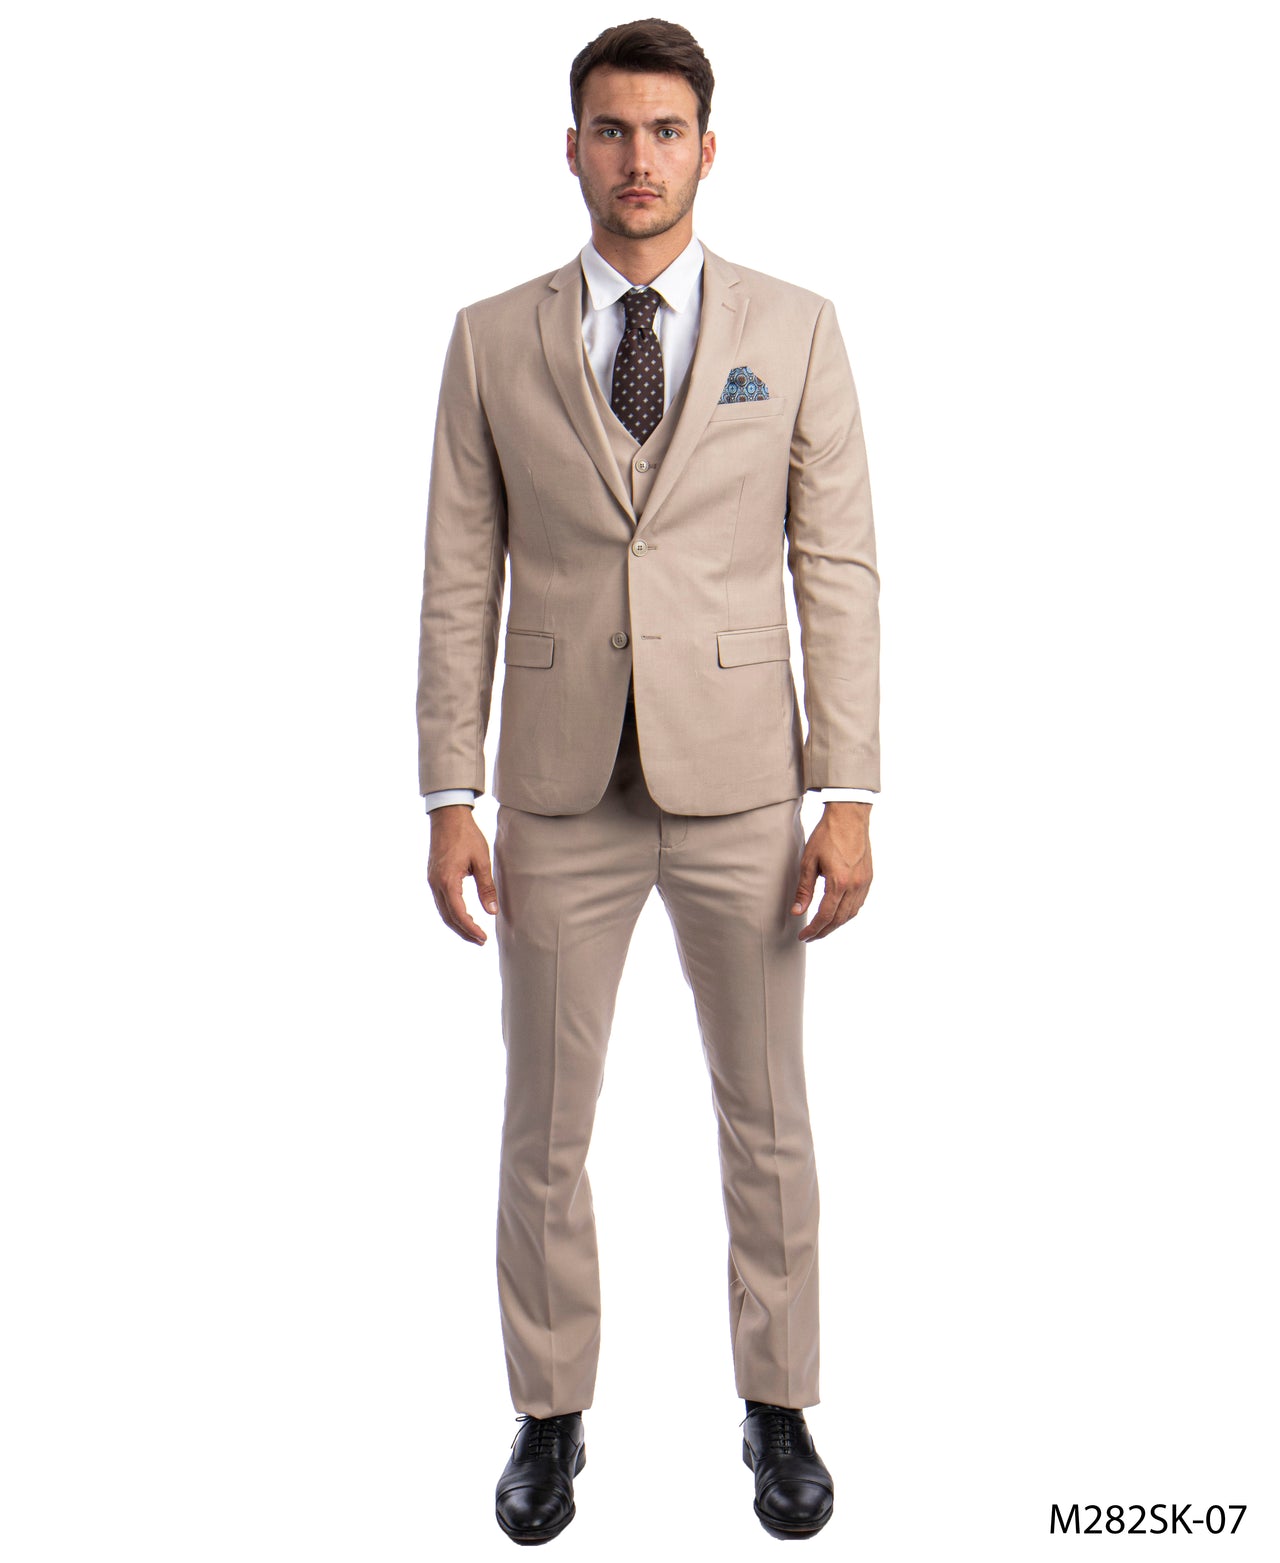 M.Tan Suit For Men Formal Suits For All Ocassions - Hattitude